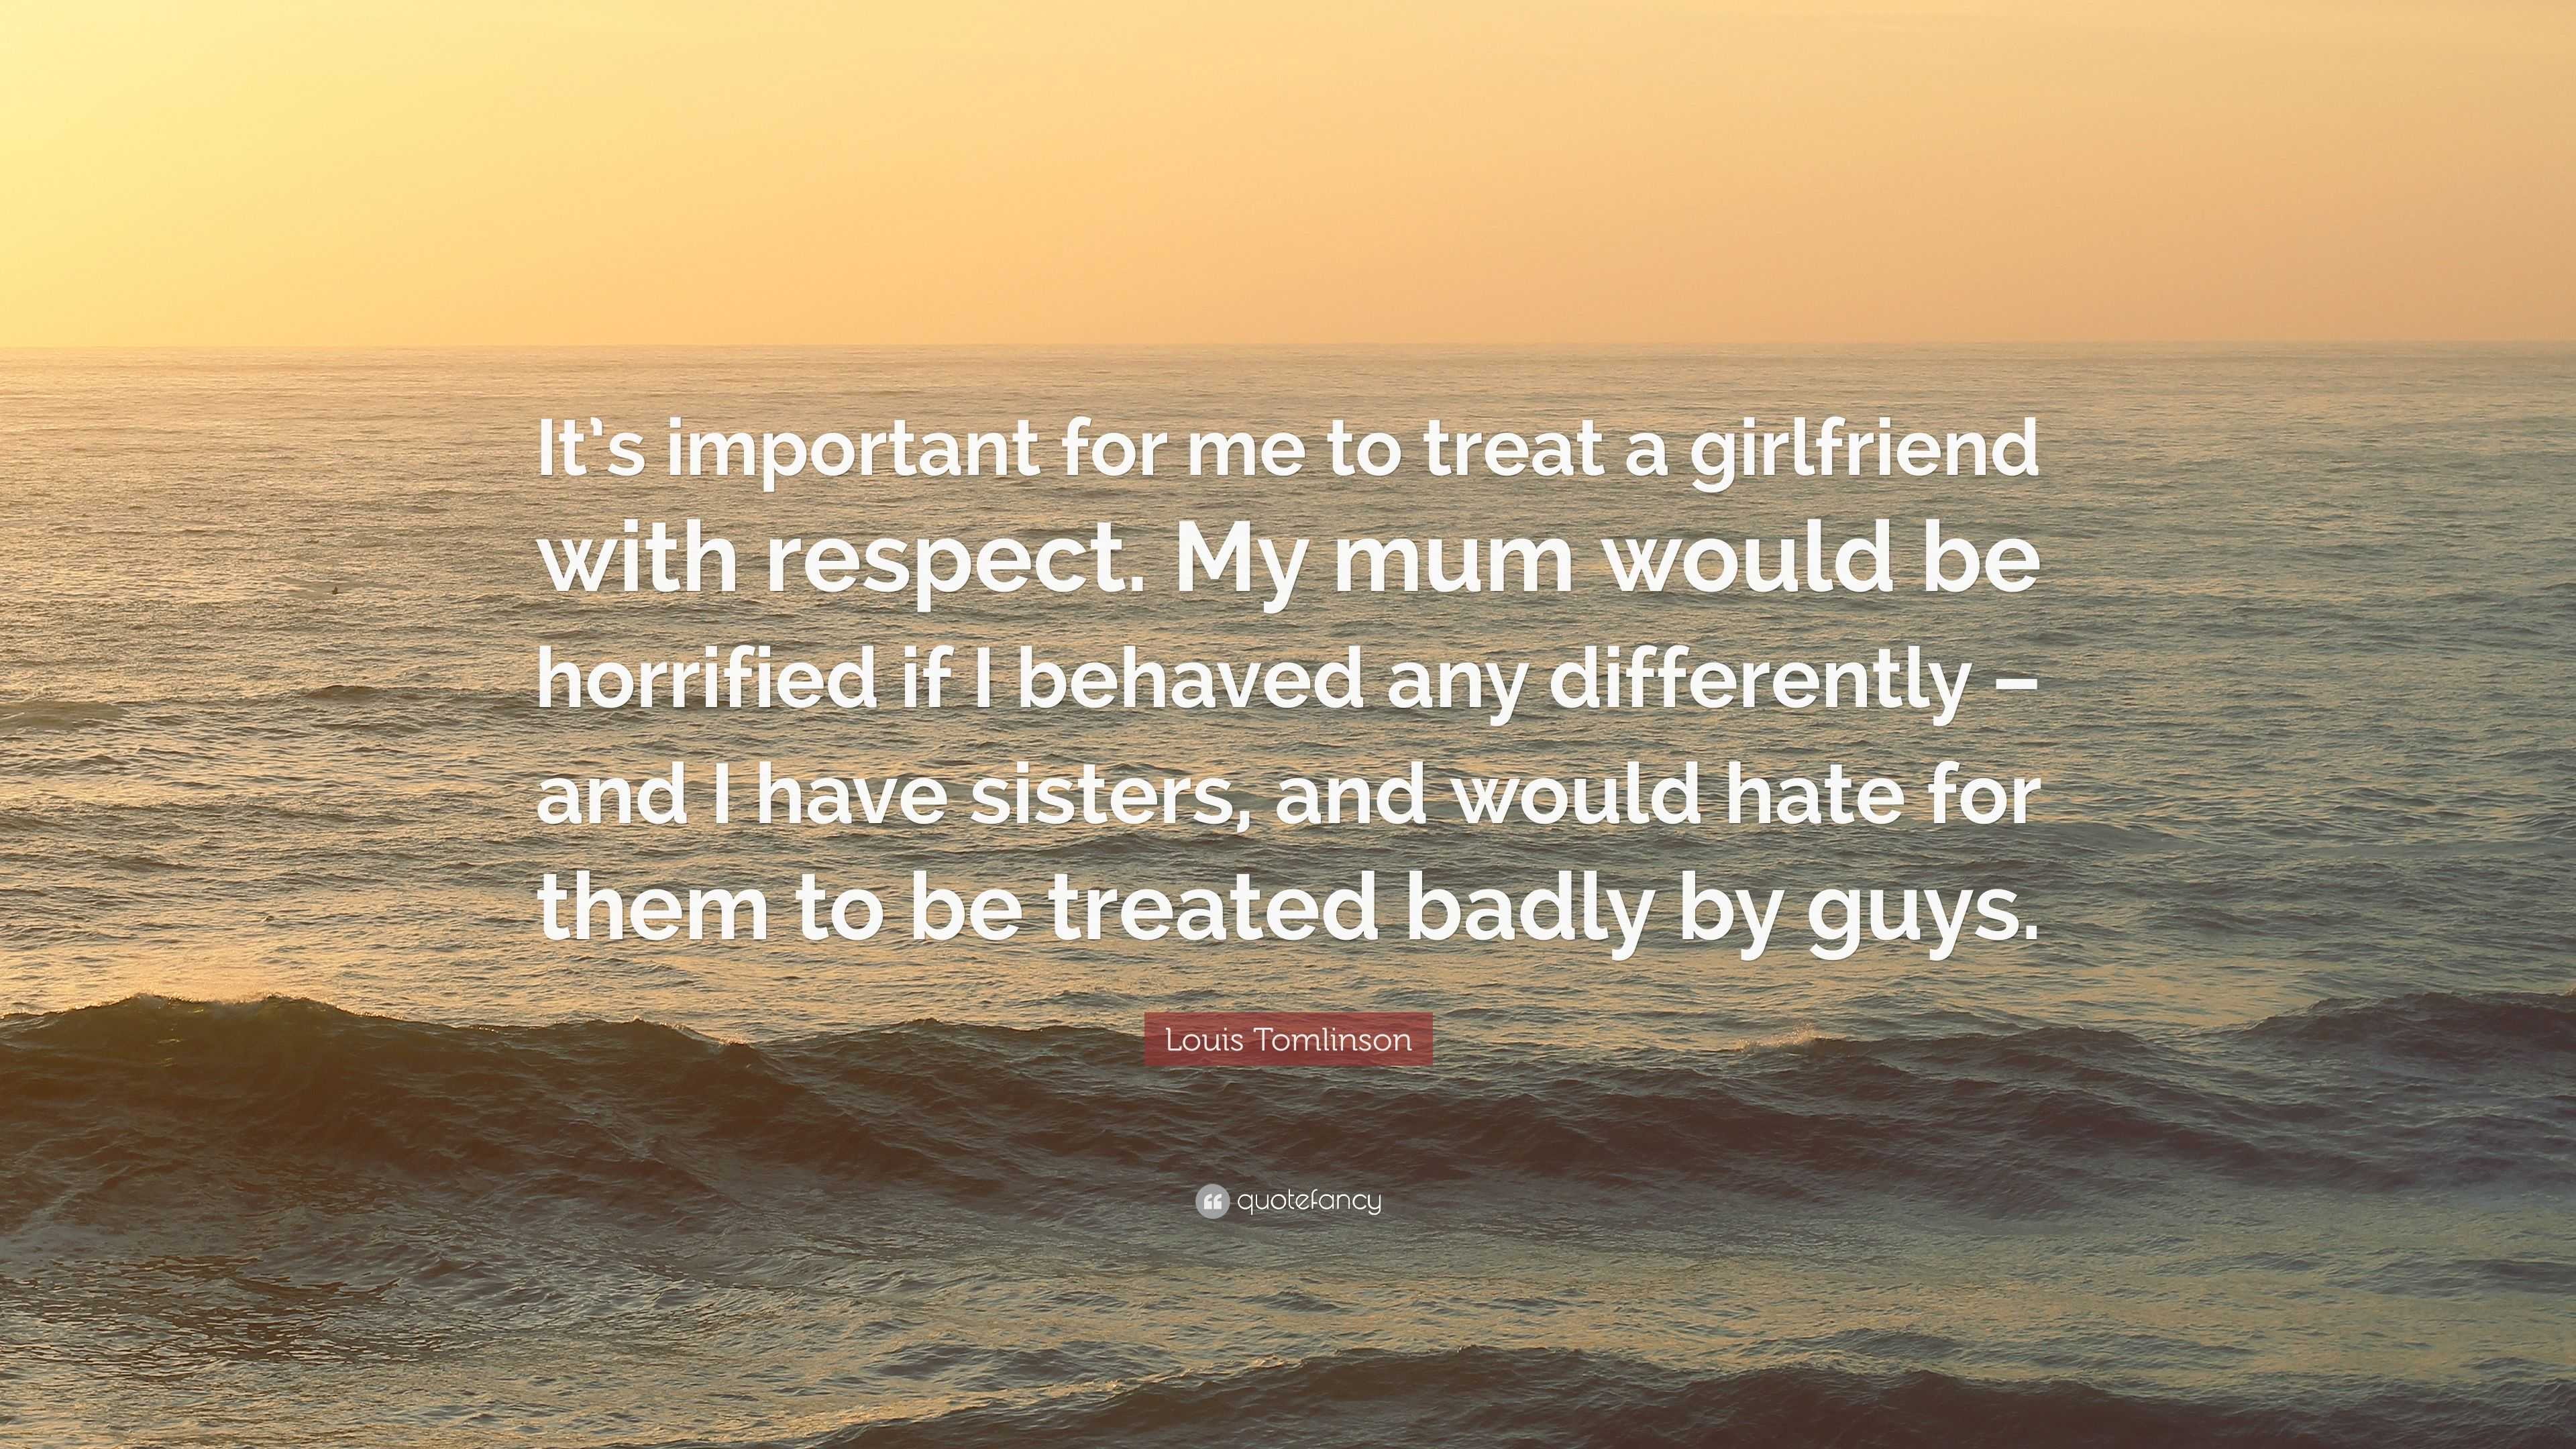 How Can I Get My Girlfriend To Respect Me?